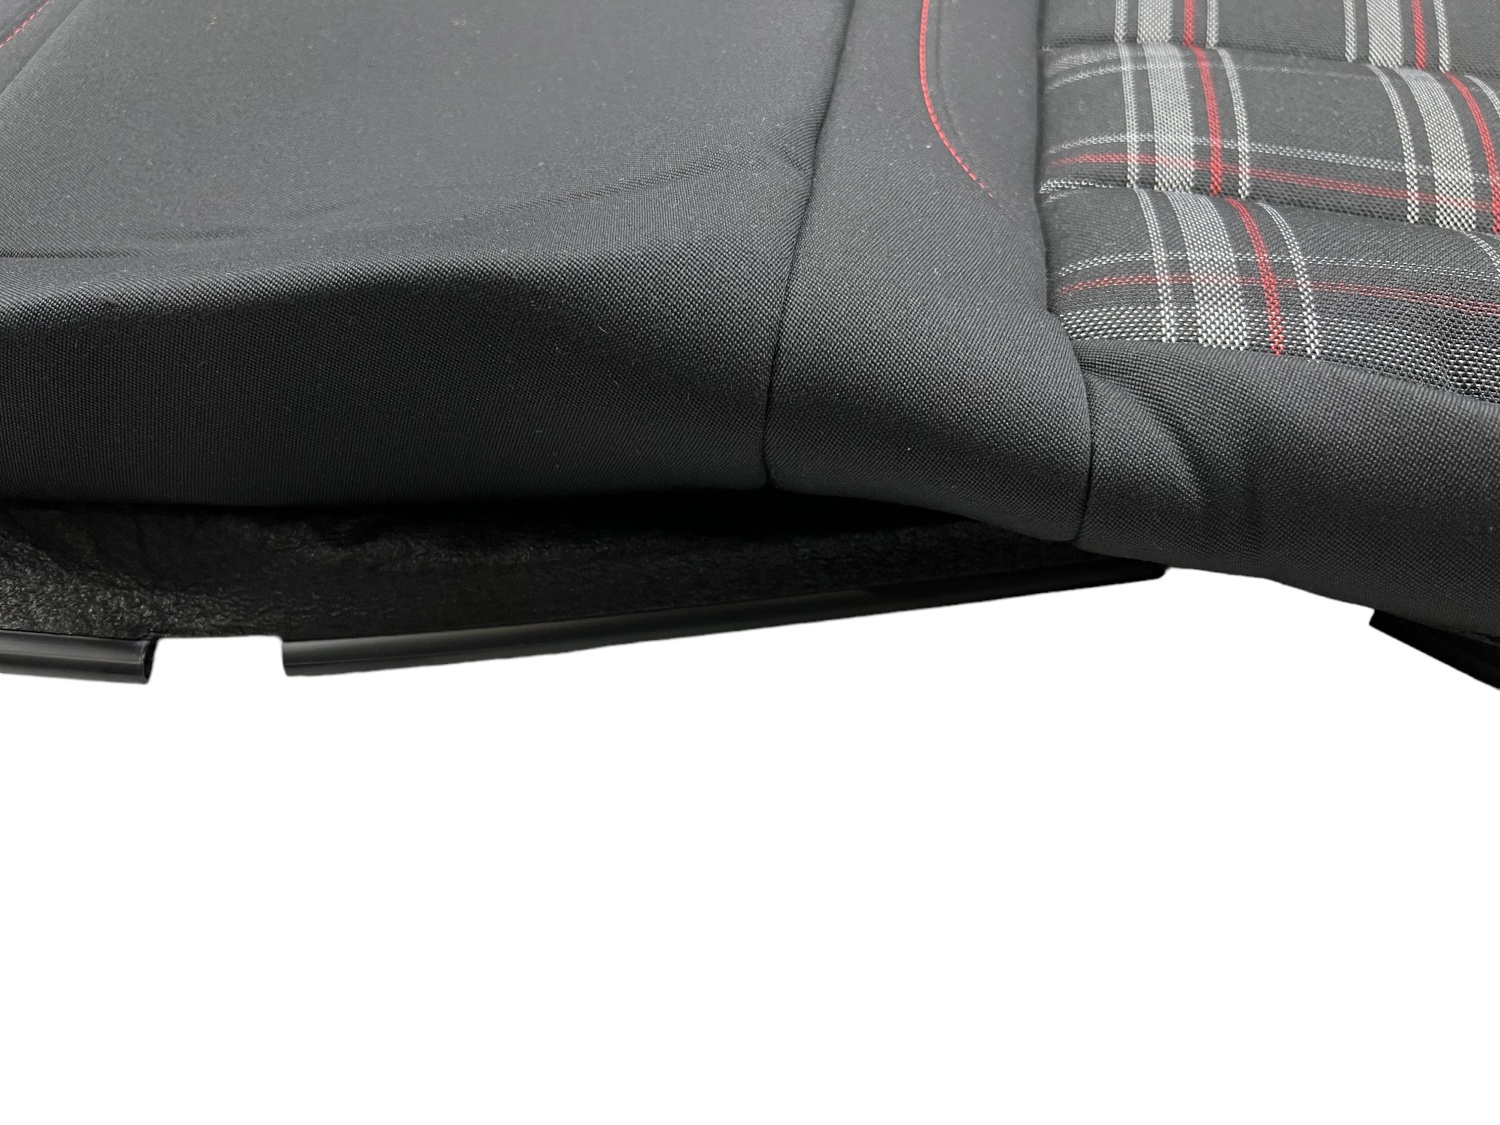 OEM VW Golf 6 VI Gti Seat Cover Back Black Red Fabric Rear Seat